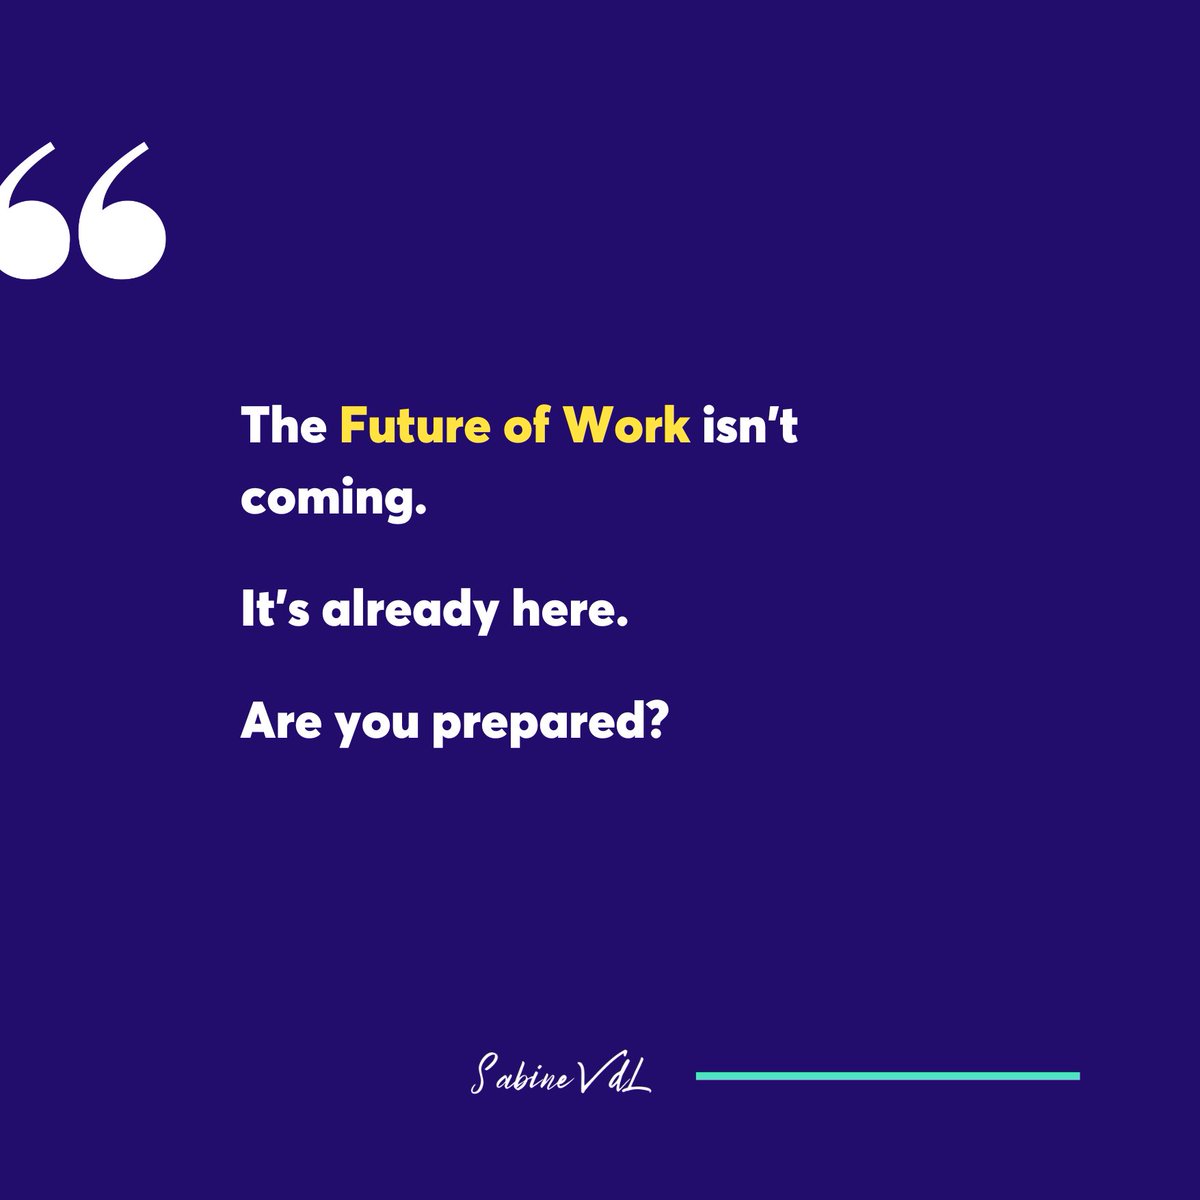 COVID-19 didn't just tweak work models, it revolutionized them. 🌍 The #FutureofWork is about more than tech. It's mental well-being, inclusivity, agile thinking. AI Automation brings efficiency, but creativity and emotional intelligence are our differentiators. Change is here!